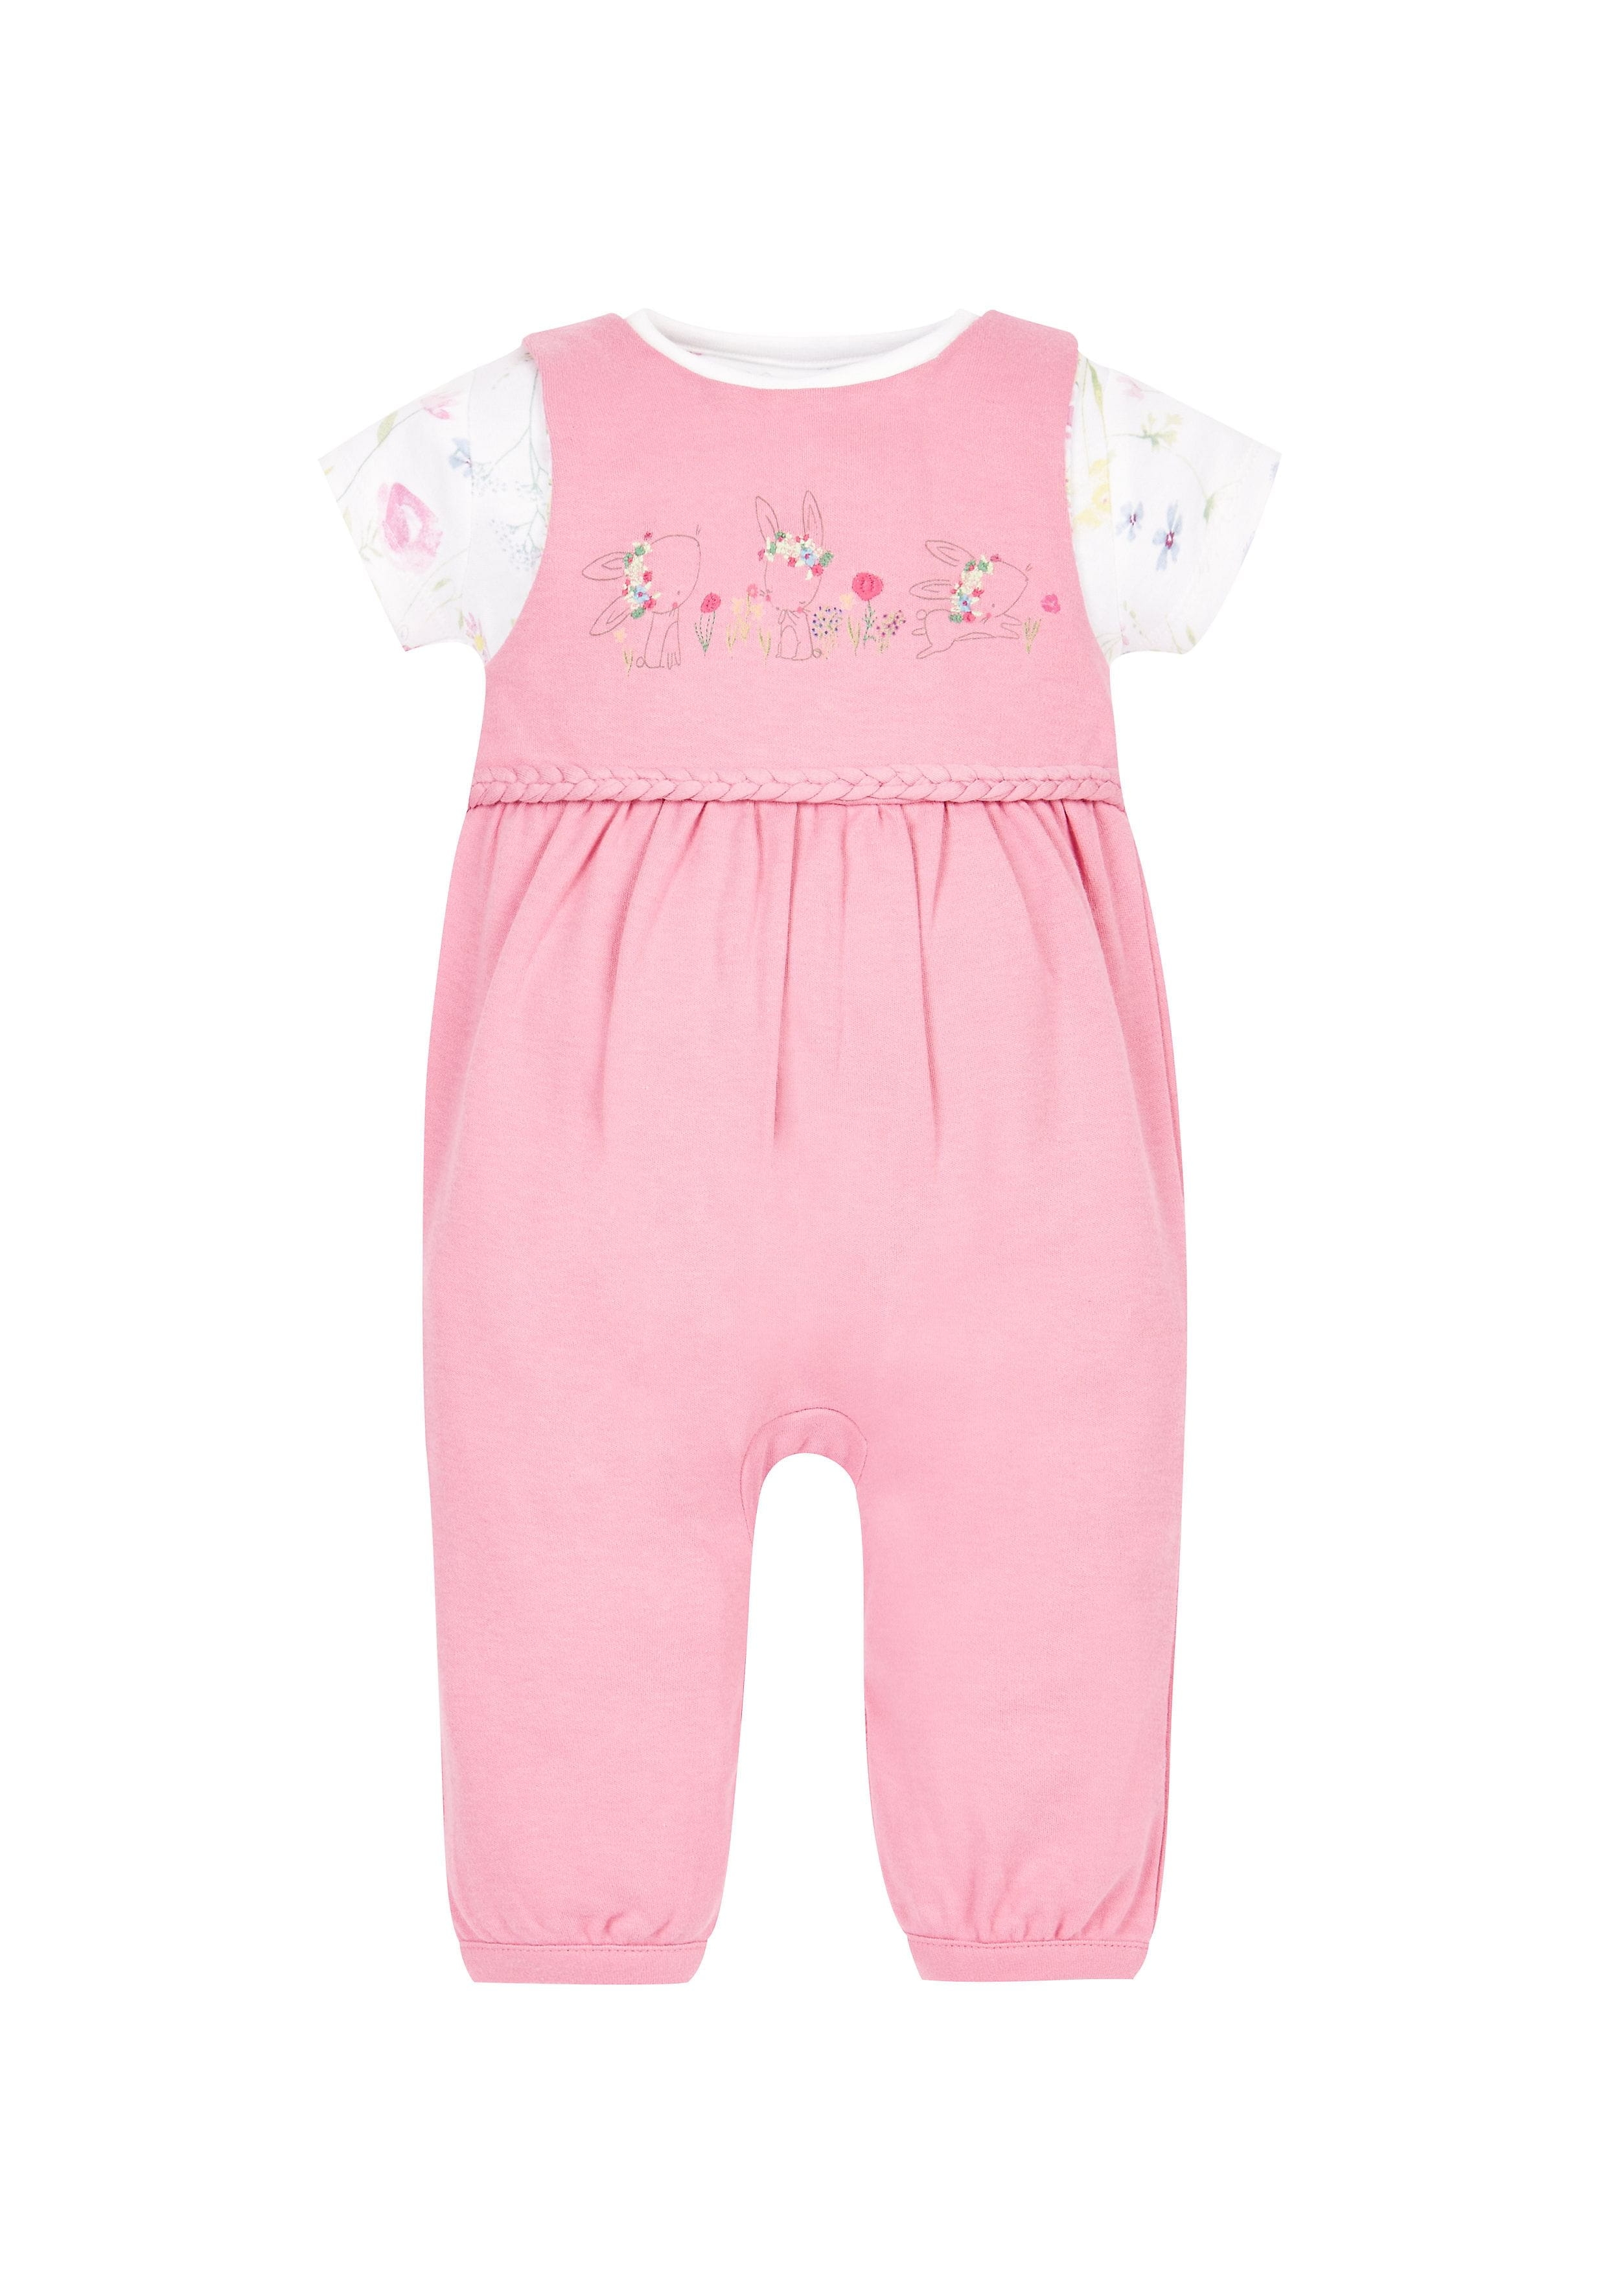 Mothercare | Girls Floral Bodysuit And Dungaree Set - Grey 0